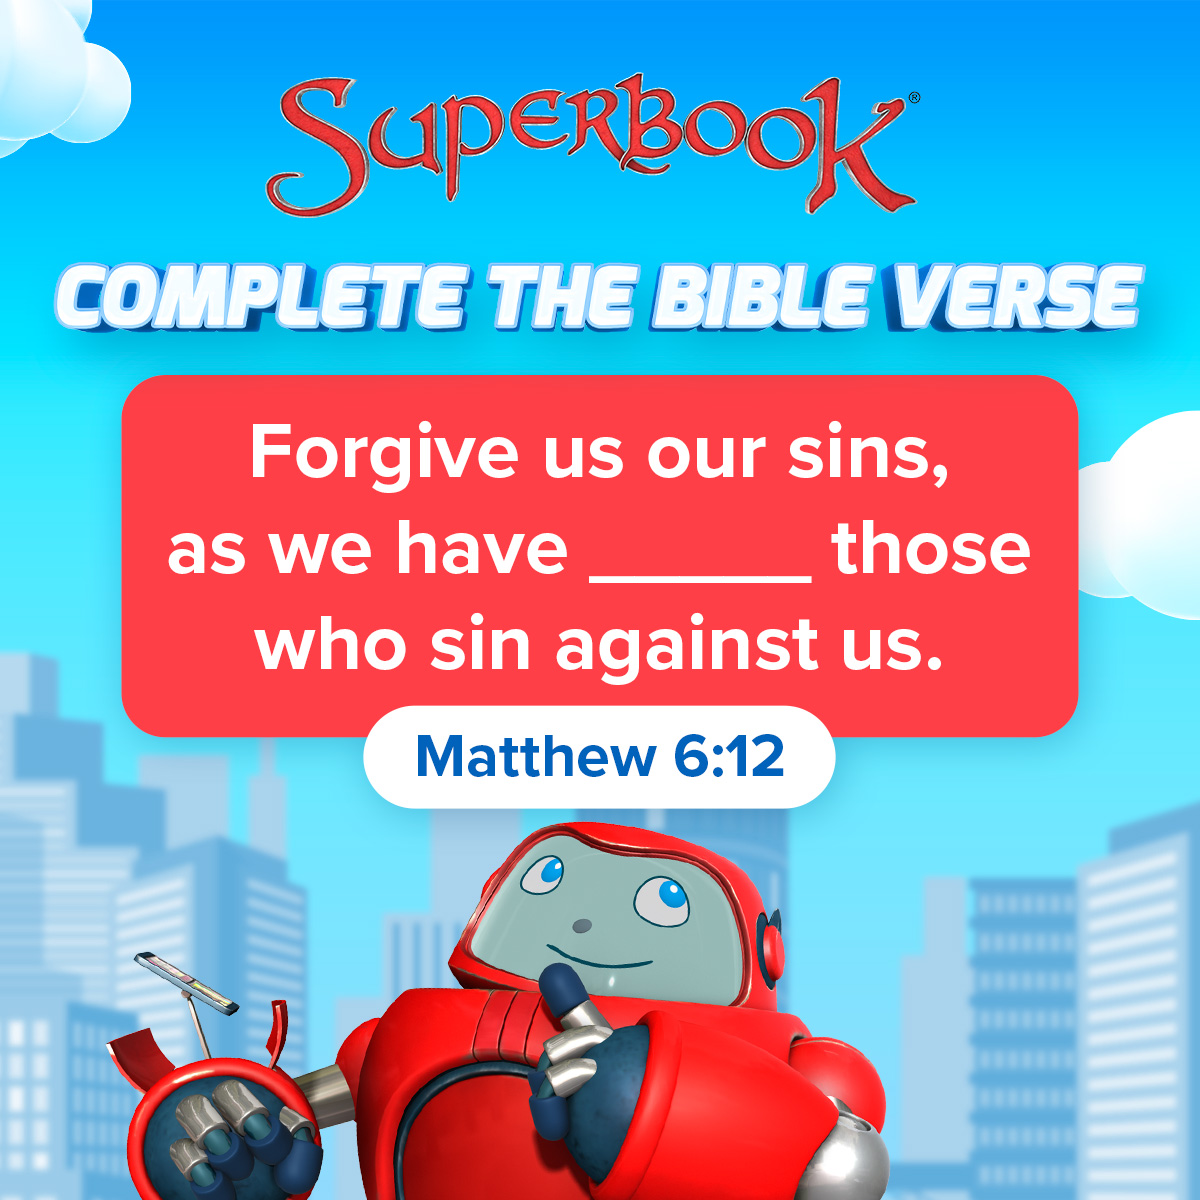 'SupeRBook COMPLETE THE BIBLE VERSE who Forgive us our sins, as we have those sin against us. Matthew 6:12'